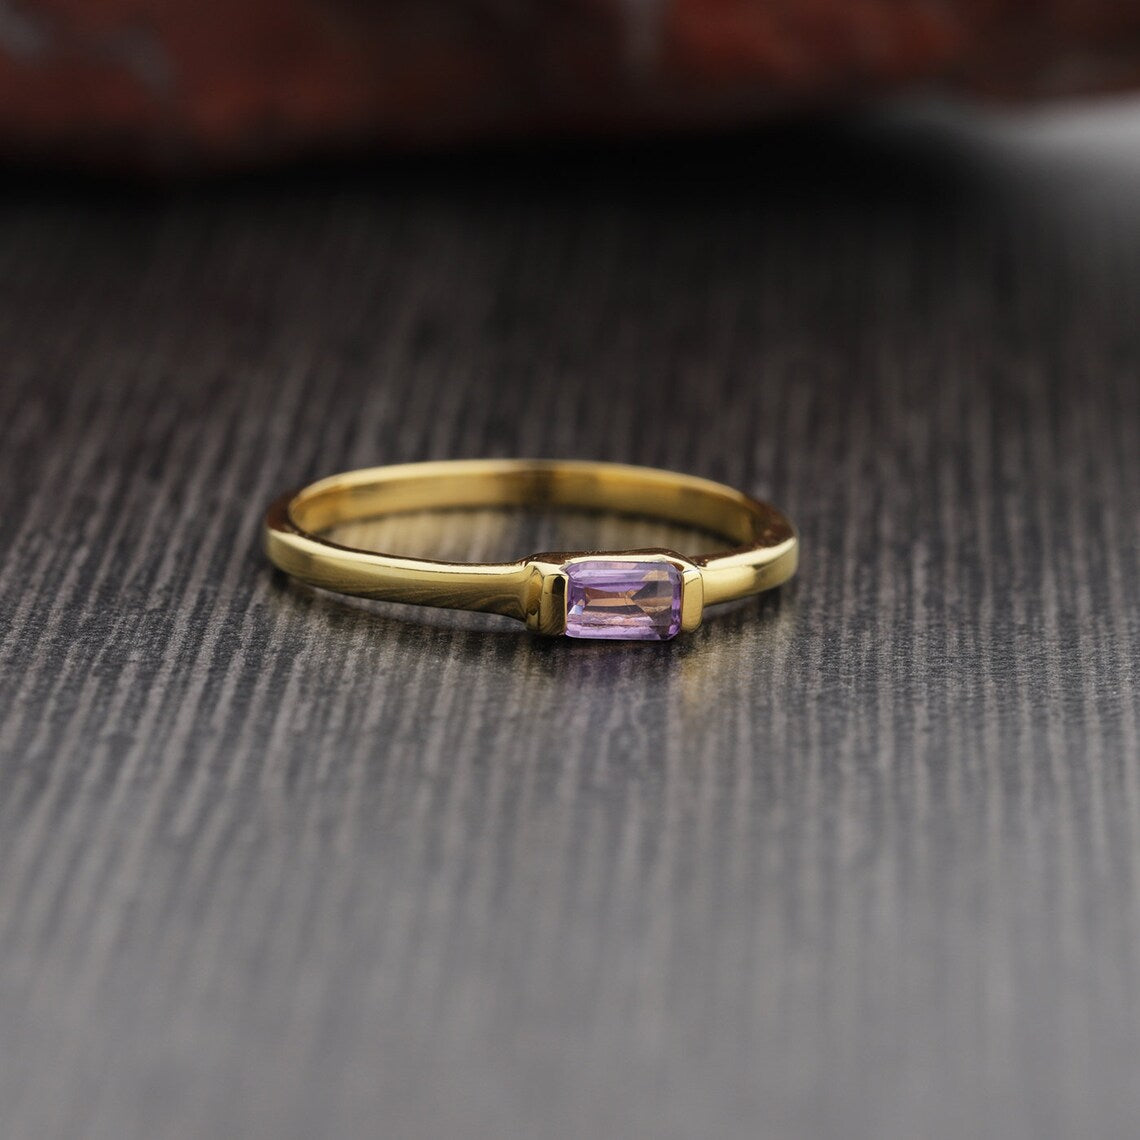 18K Gold Plated - Sterling 925 Silver Amethyst Ring, Natural Amethyst February Gemstone, Handmade Vermeil Gold Stacking Ring, Dainty Minimalist Women's Gifting Jewelry